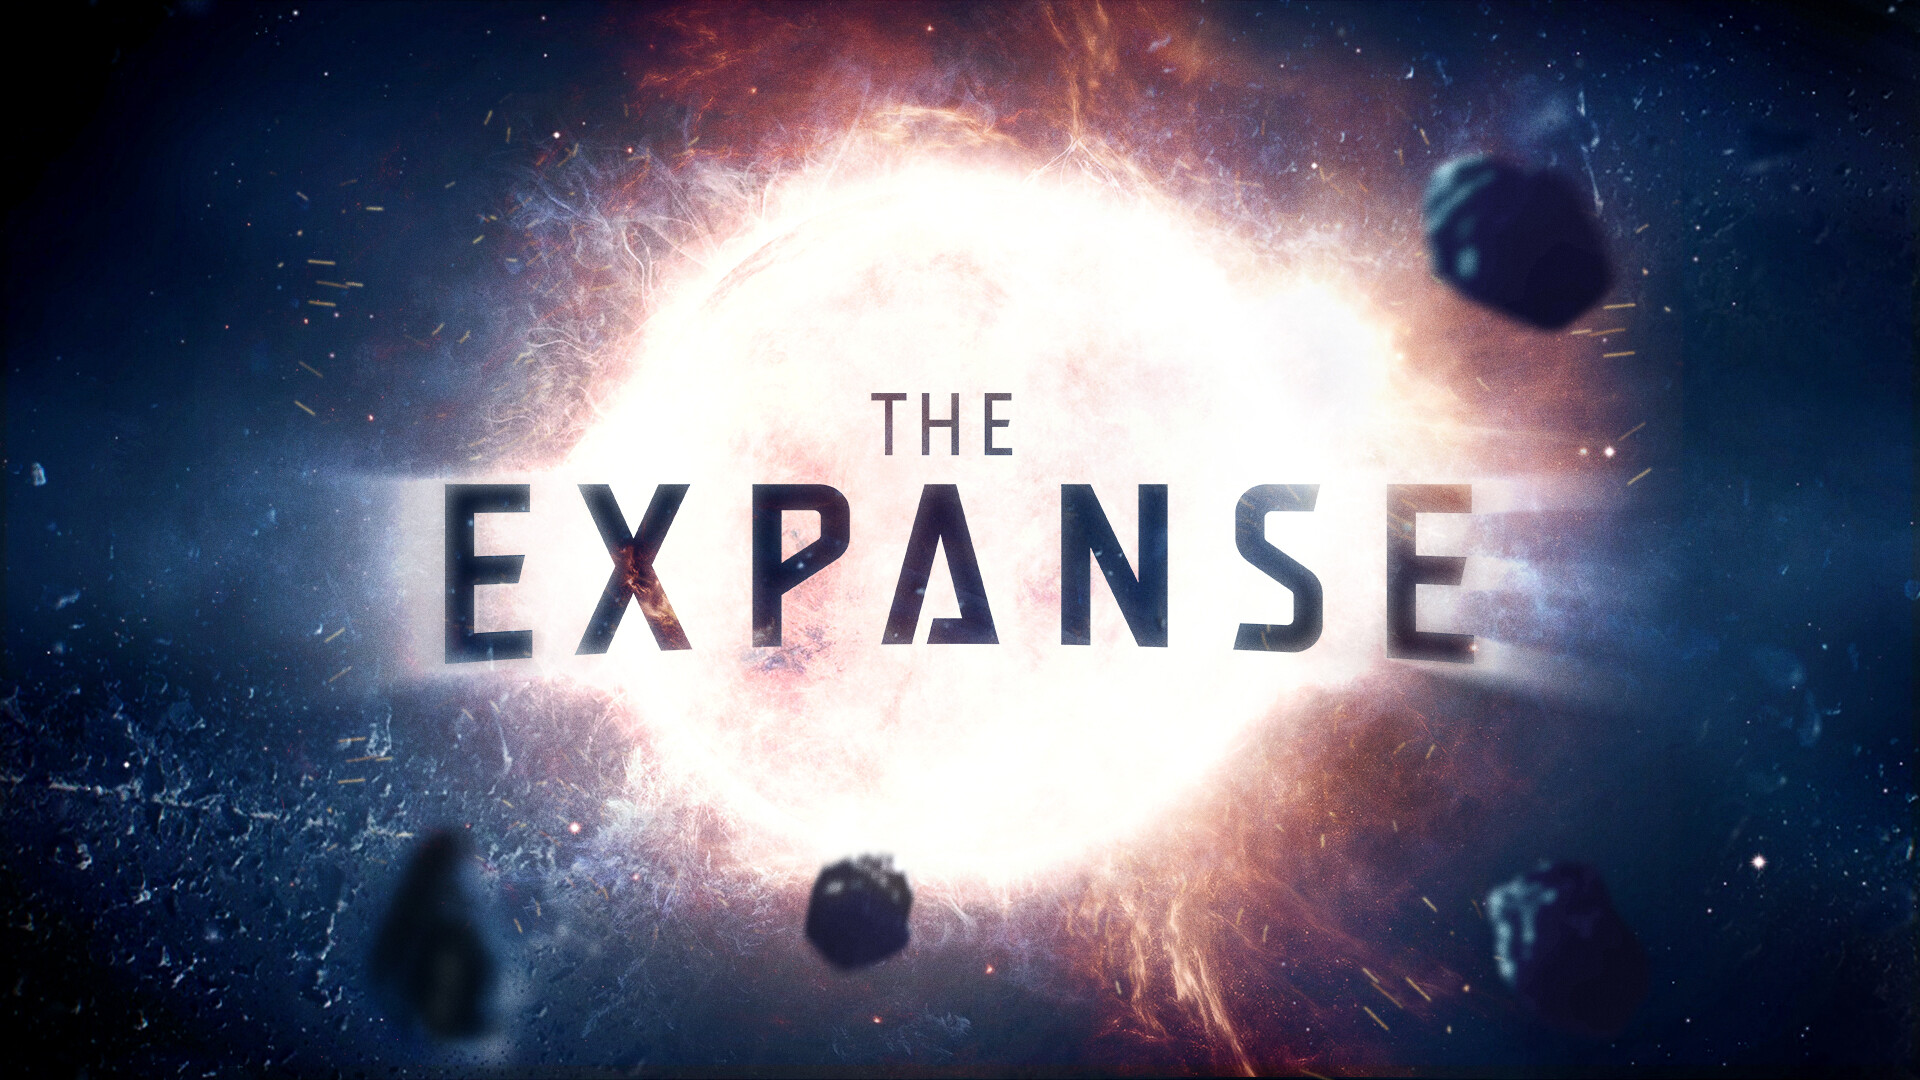 The Expanse: The epic sci-fi series, Mark Fergus and Hawk Ostby, Six seasons. 1920x1080 Full HD Wallpaper.